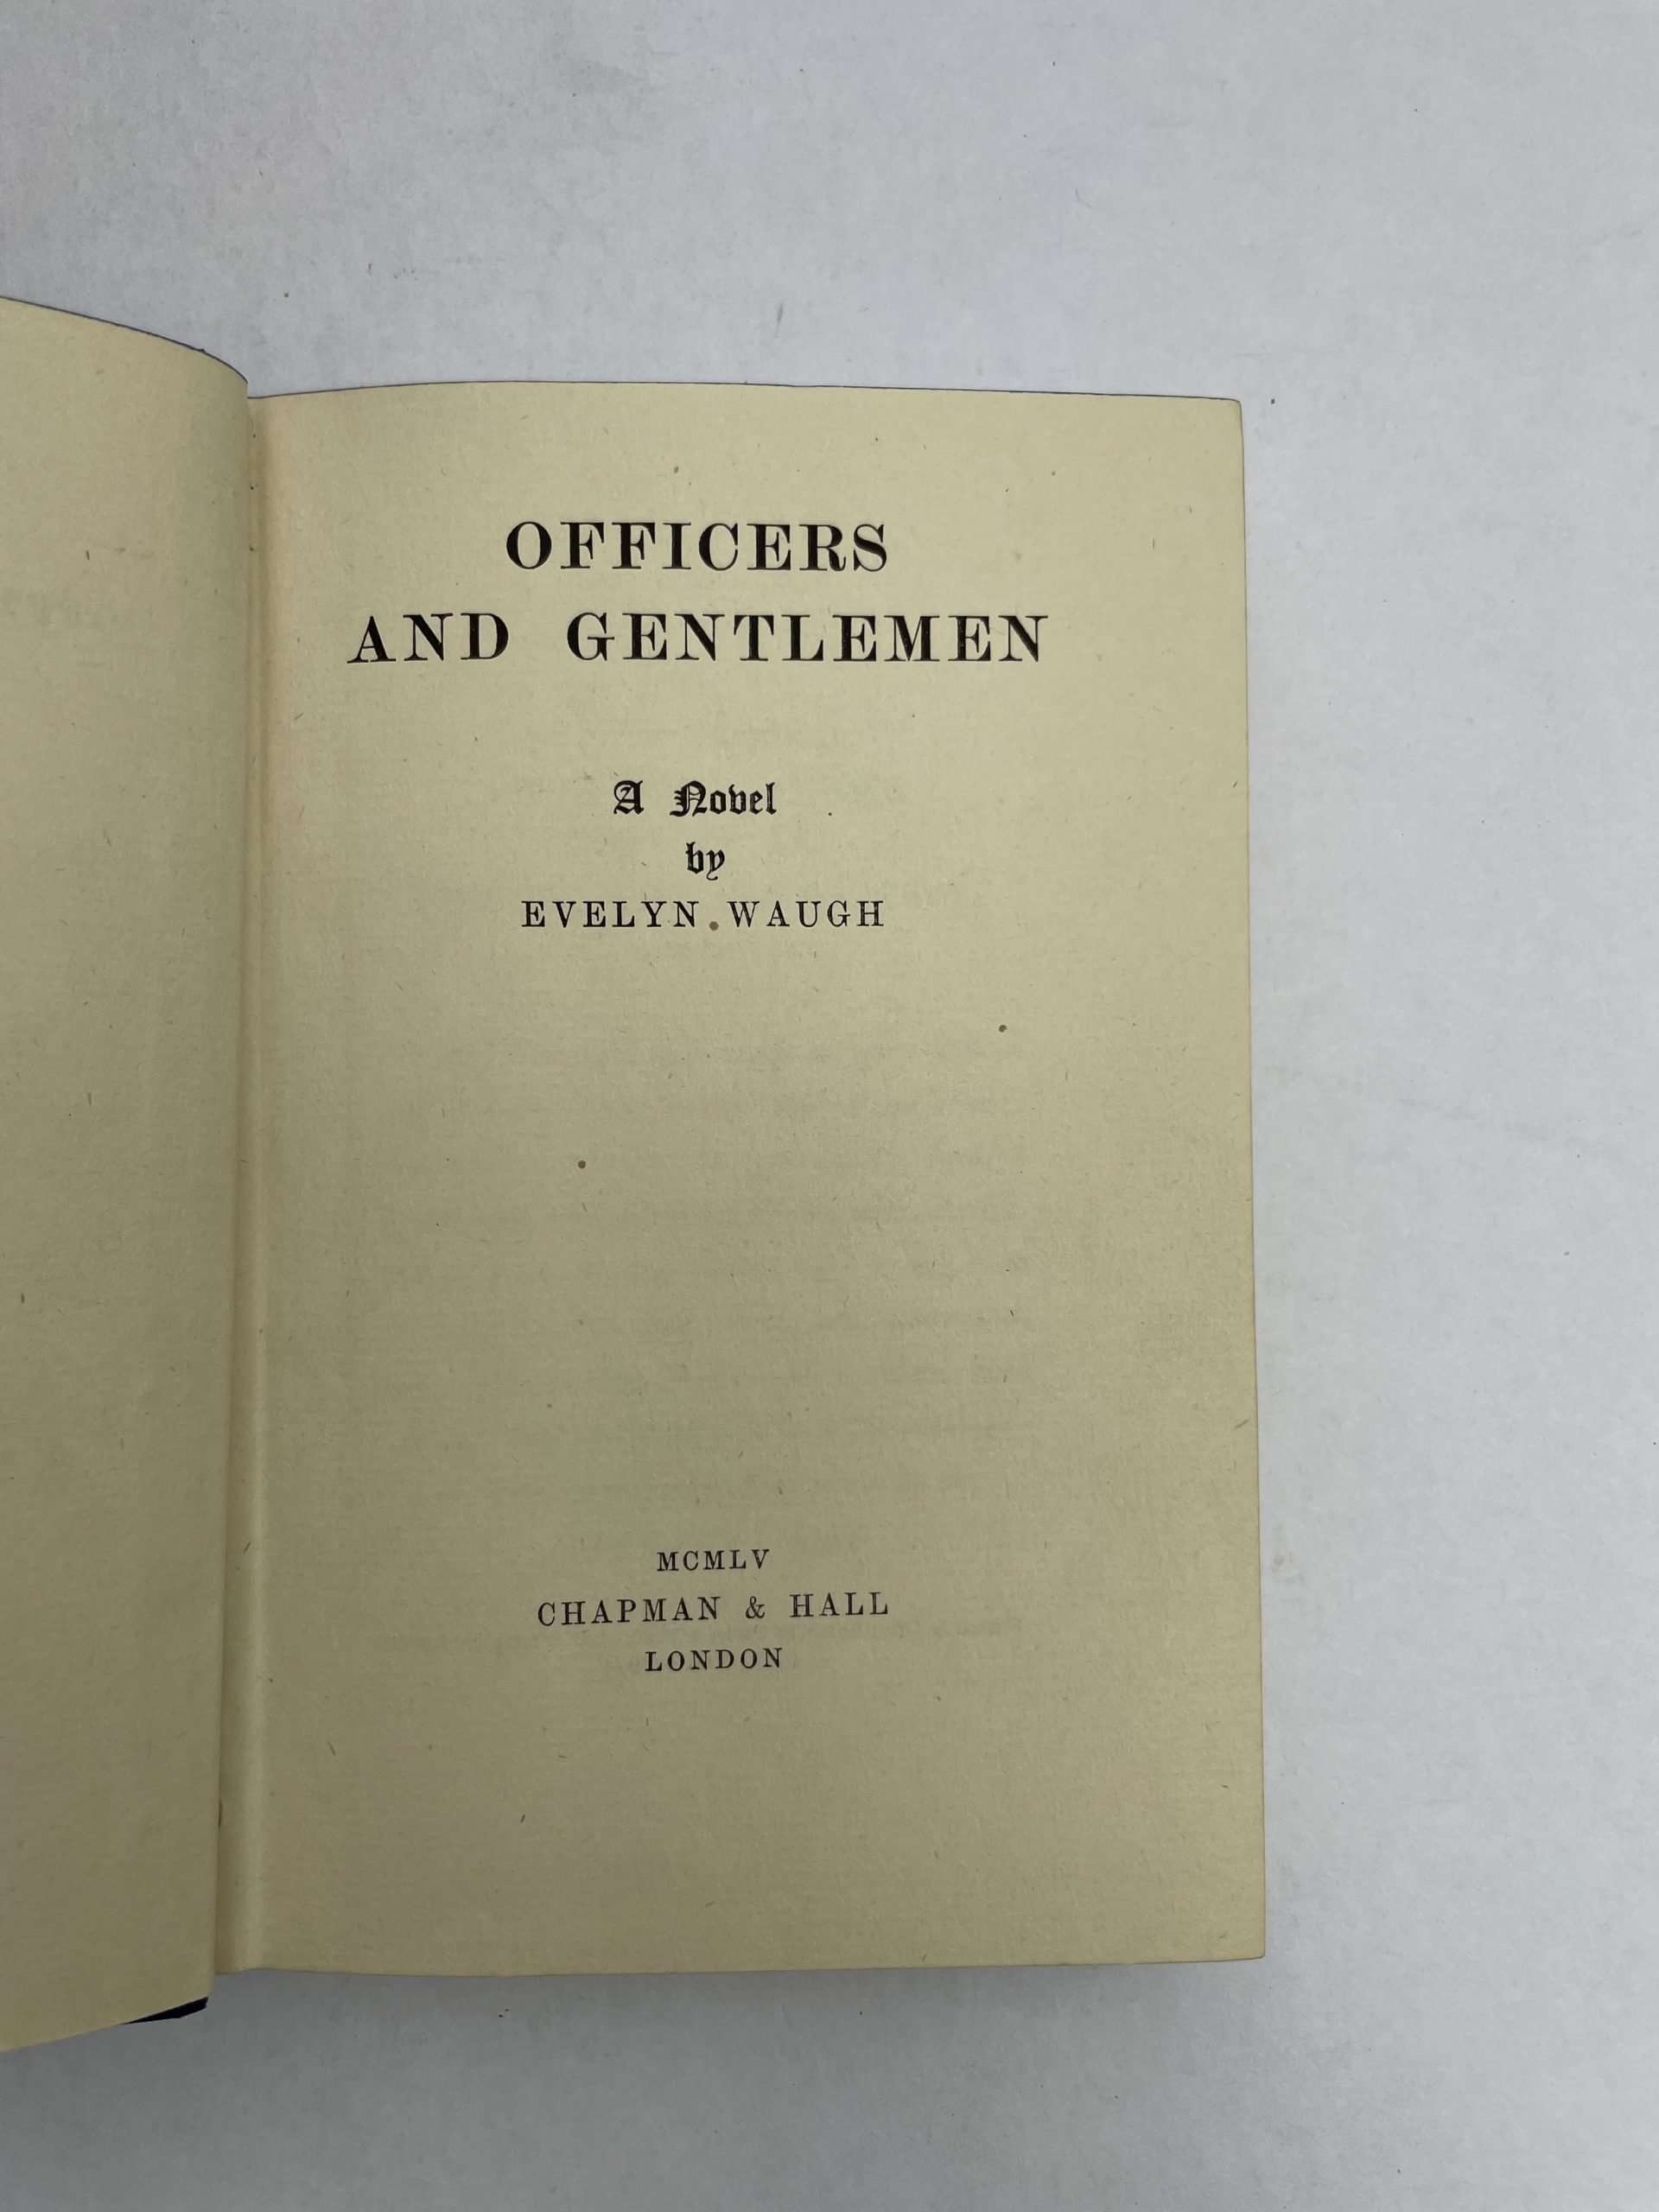 evelyn waugh officers and gentlemen first ed 2